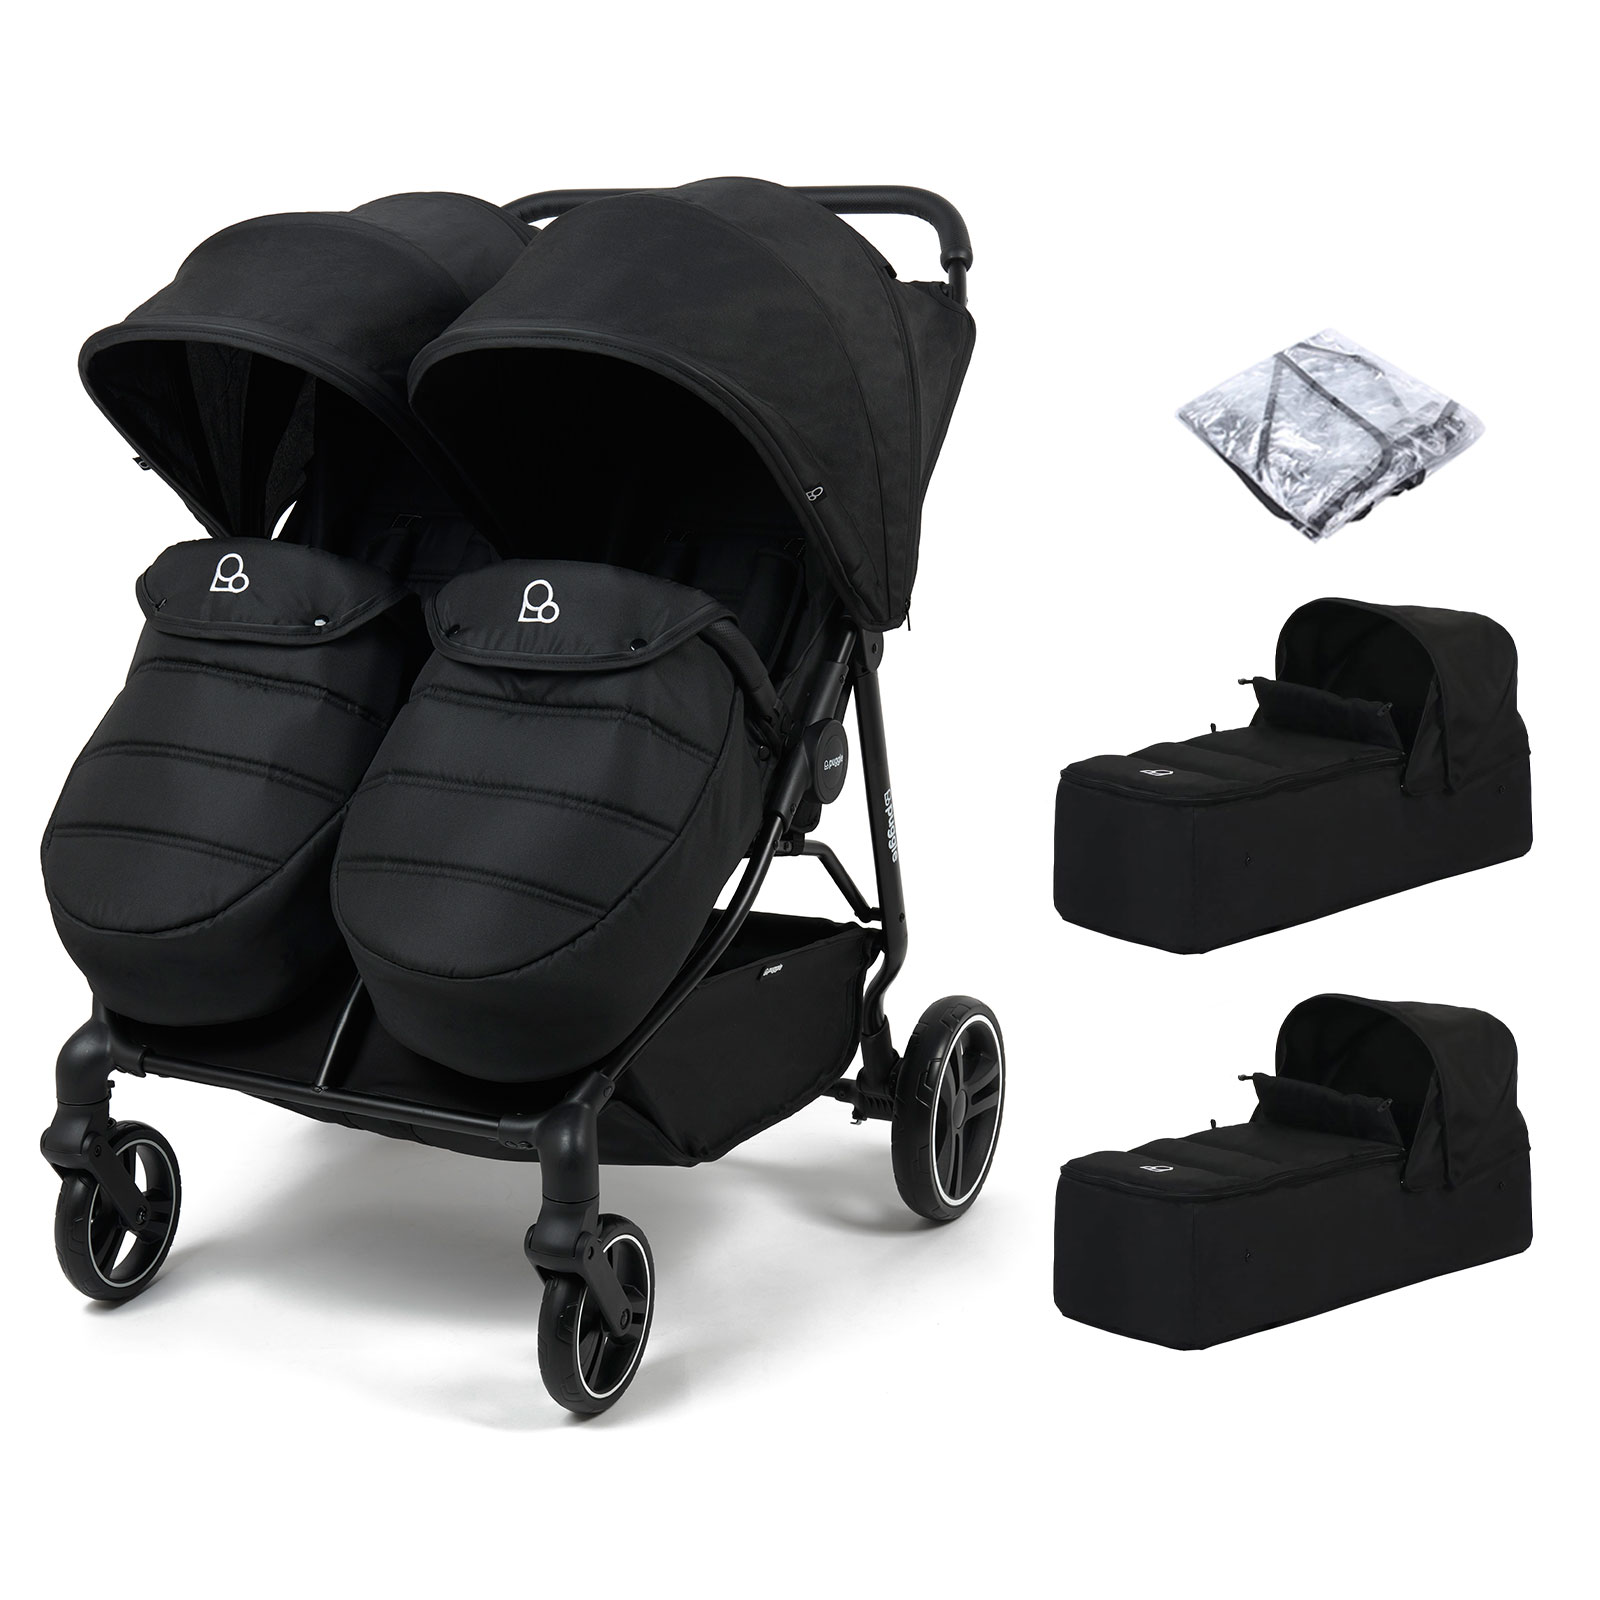 Puggle Urban City Easyfold Twin Double Pushchair with Footmuff & 2 Soft Carrycots - Storm Black